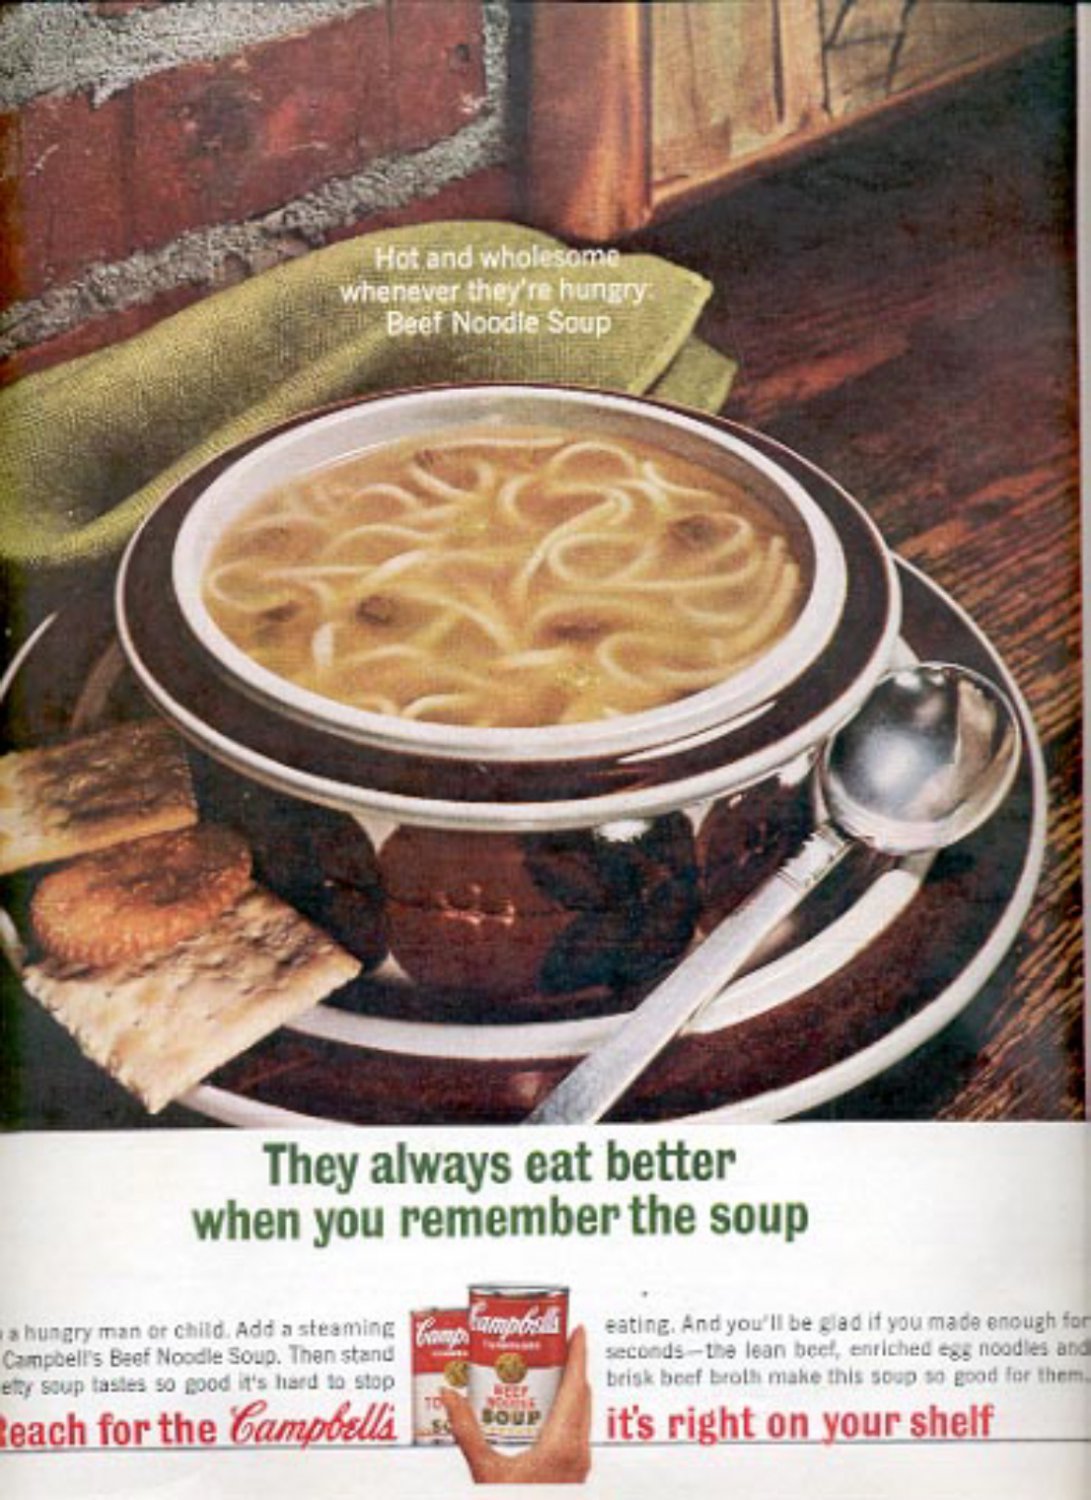 1964 - Campbell's Beef Noodle Soup magazine ad (# 4498)